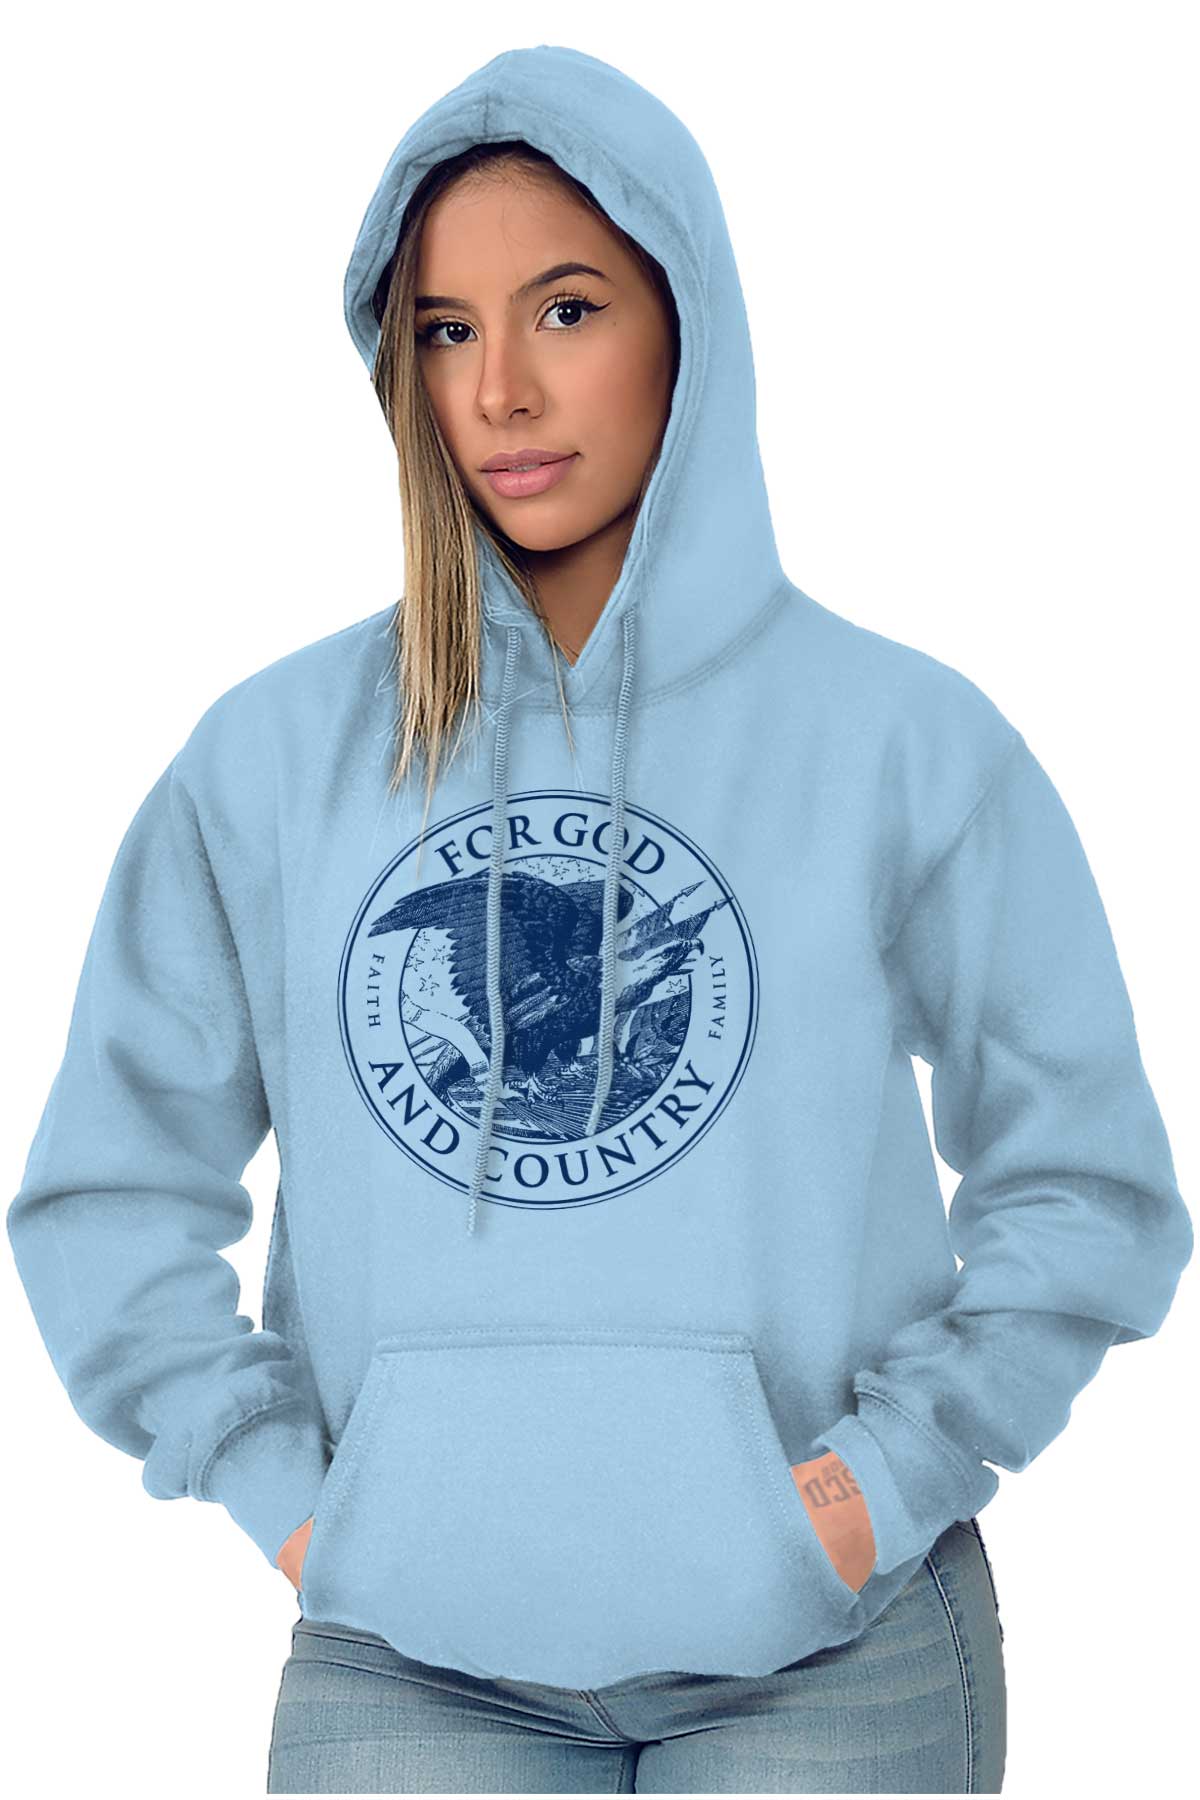 For God and Country Pullover Hooded Sweatshirt |Christian Strong